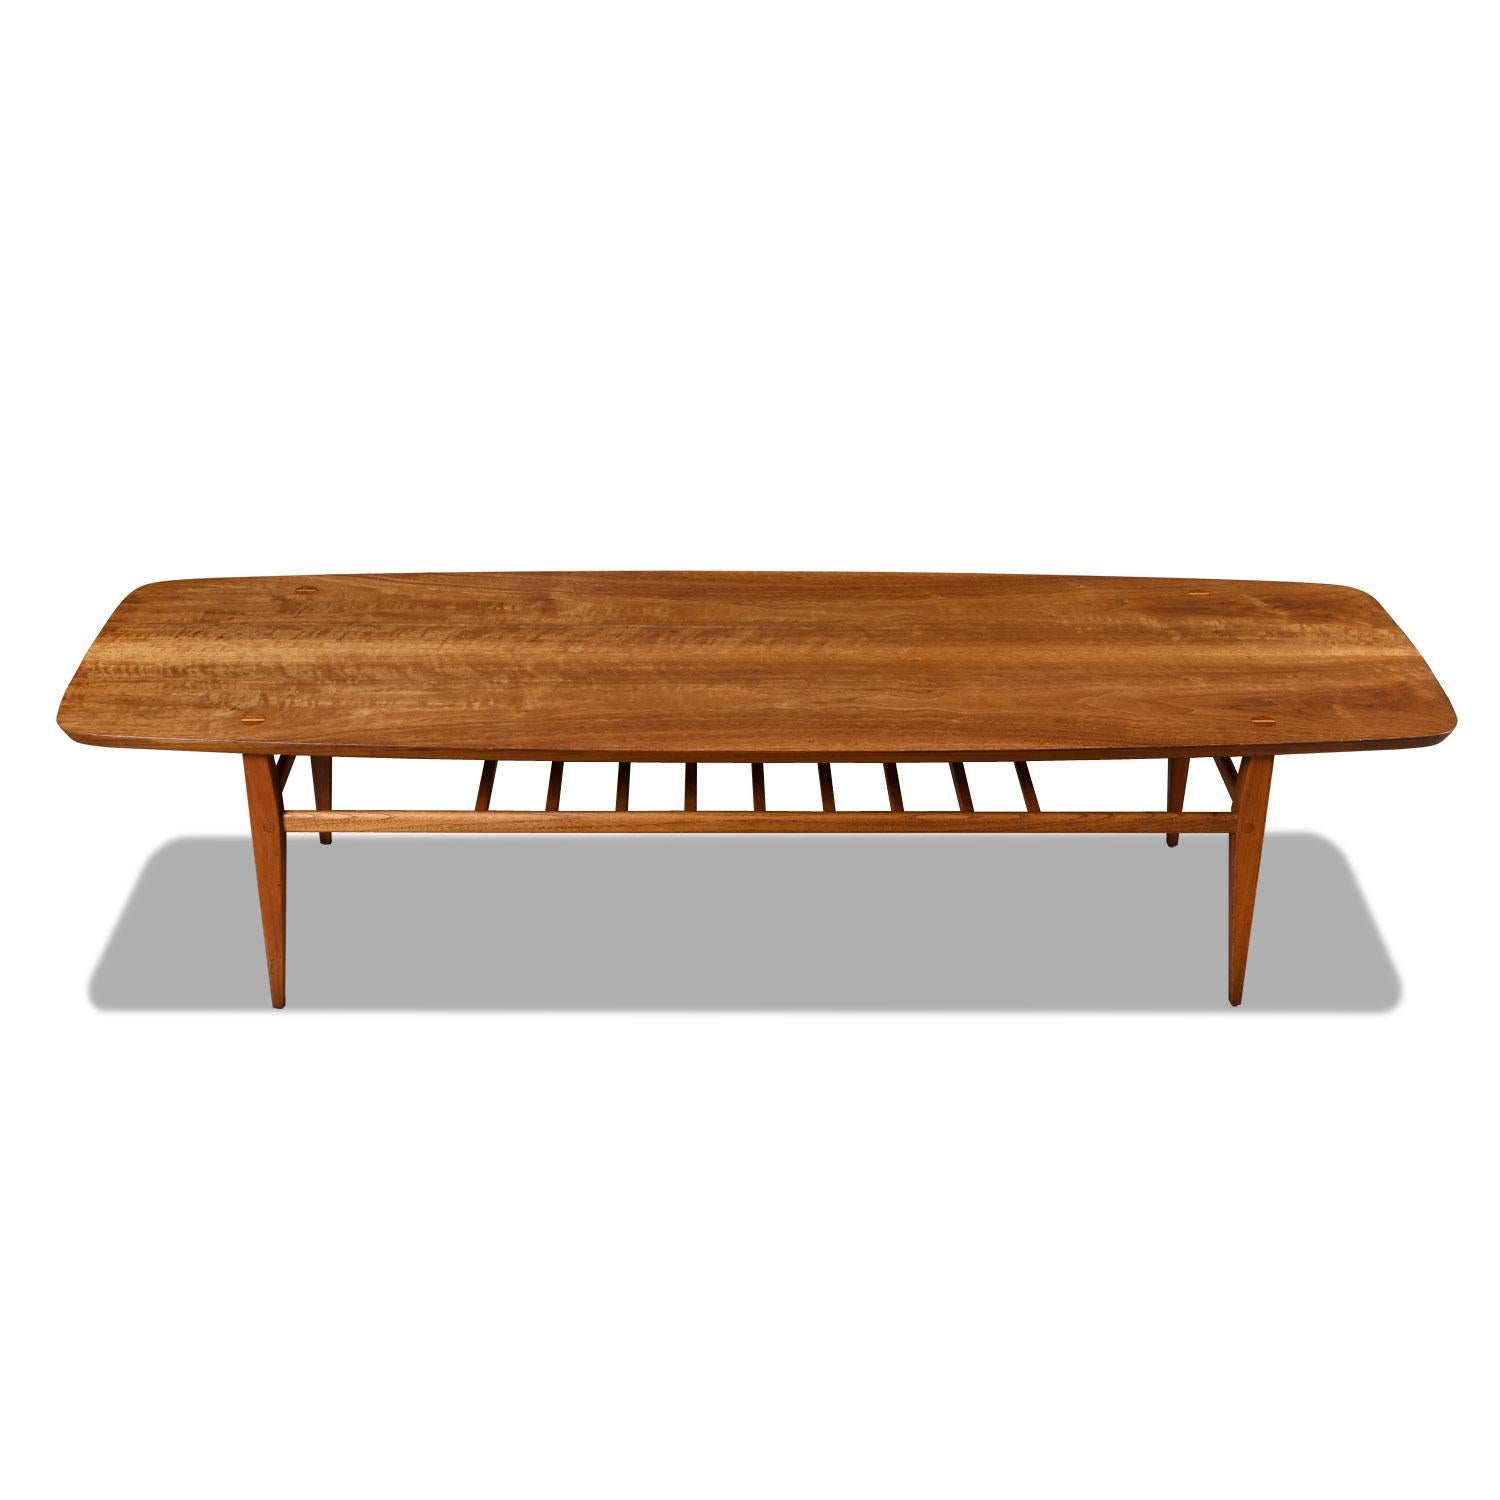 Hard to find Lane Accent coffee table by Lane. In ten years of business and hundreds of coffee tables sold, we’ve NEVER come across this collection by Lane! We were so taken by the piece, that we shipped it in from the Northeast, brought it to our